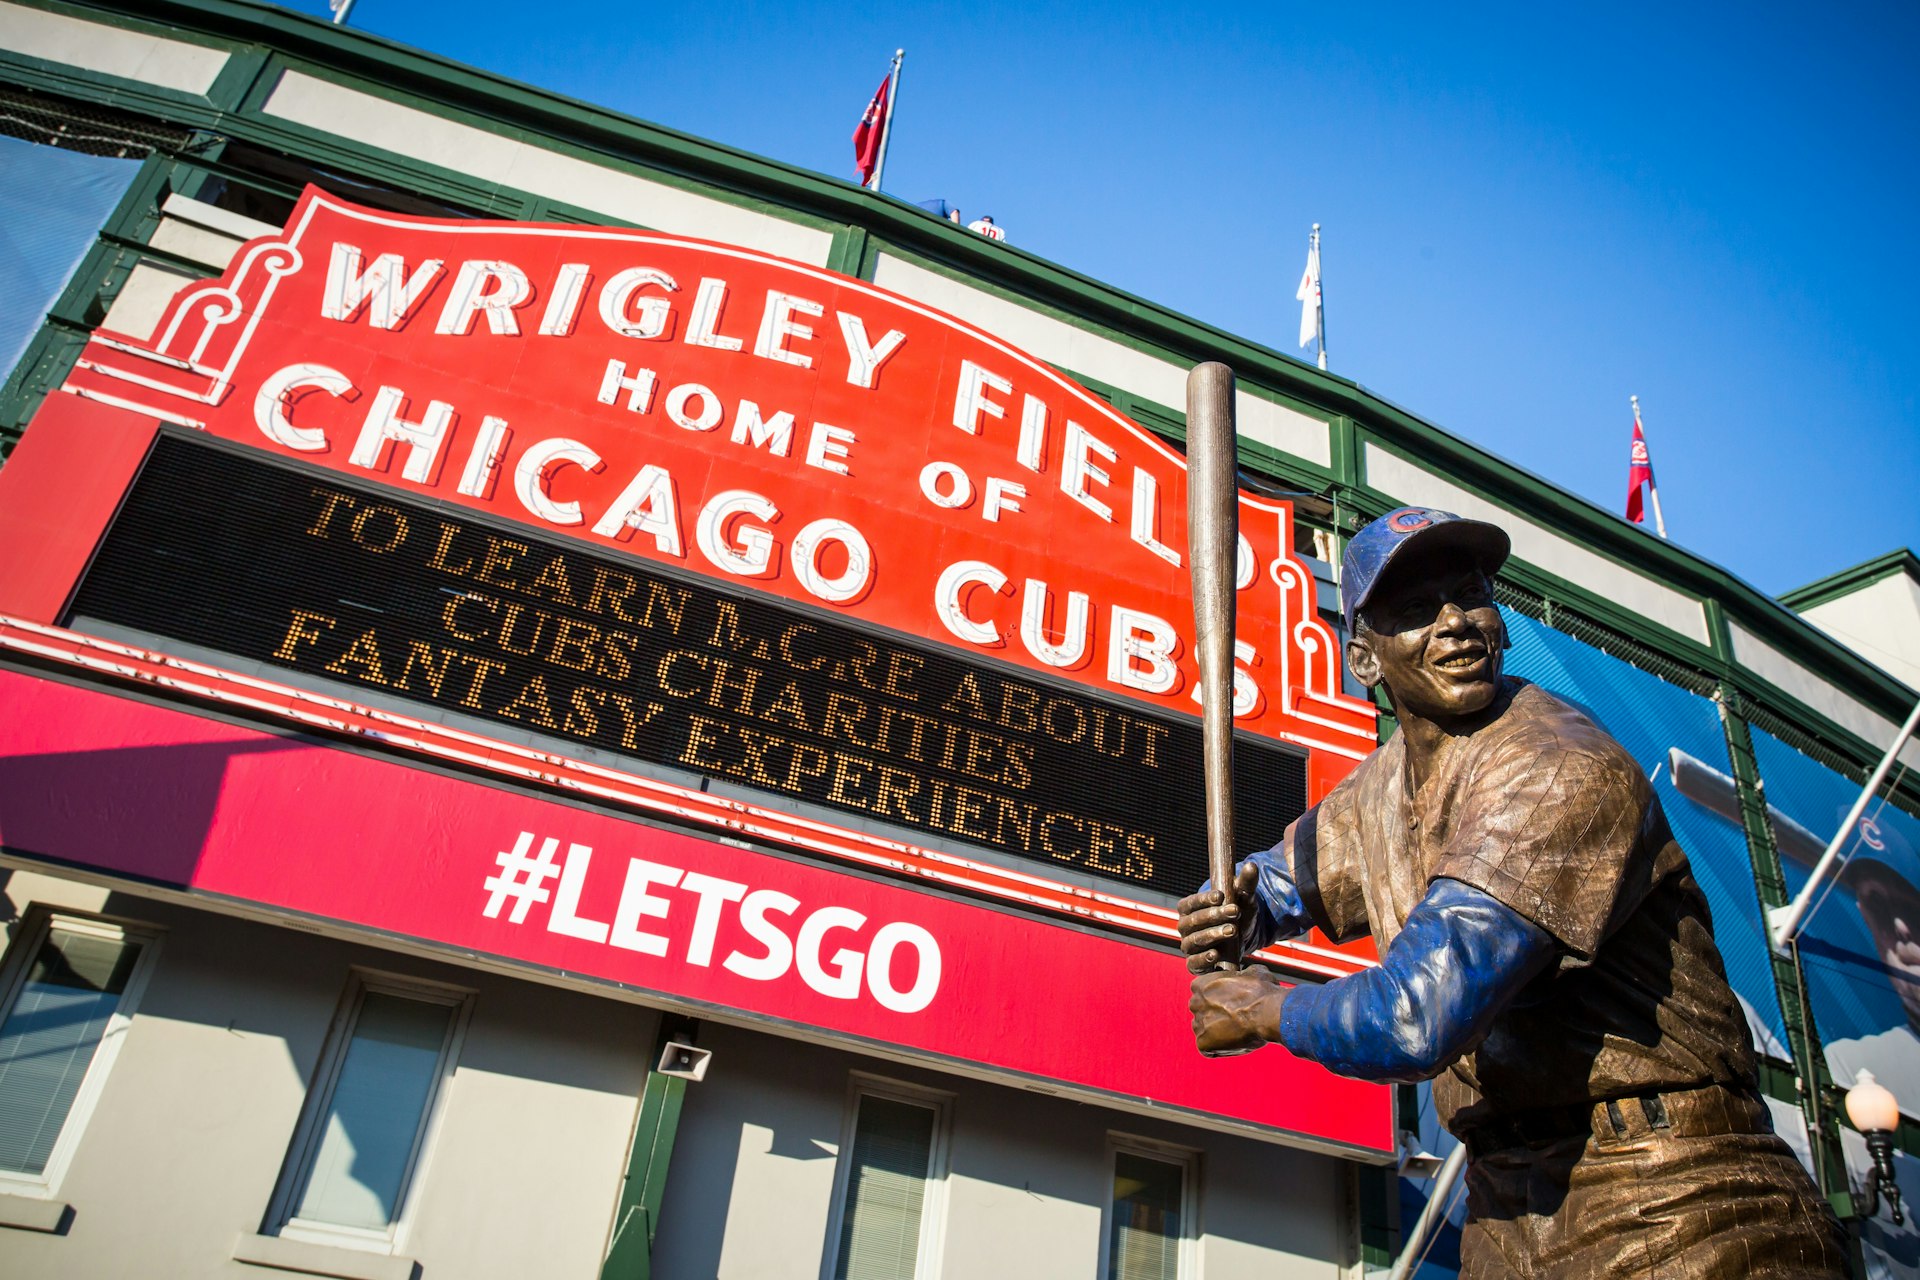 A large red-and-white sports sign outside a stadium with a bronze statue of a baseball player in front of it